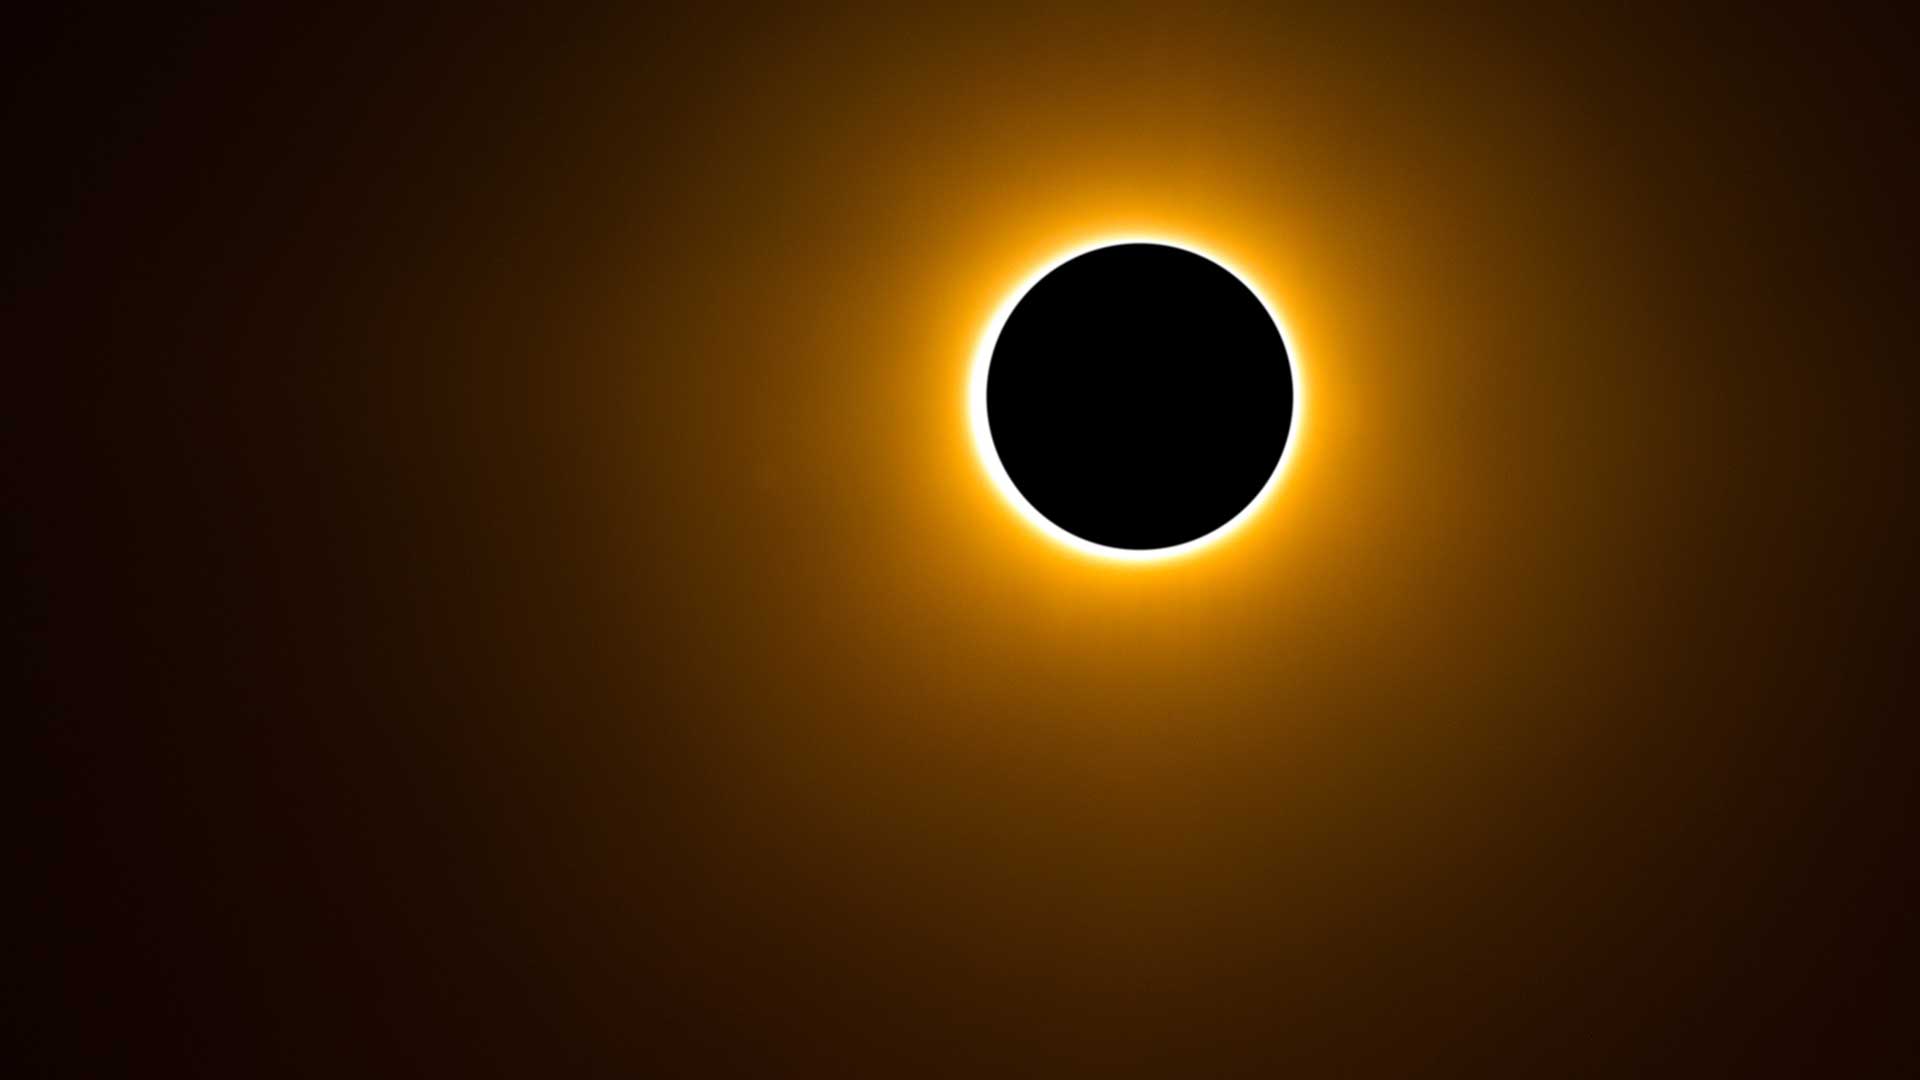 A photo of a total solar eclipse, where the sun is completely blocked out by the moon.